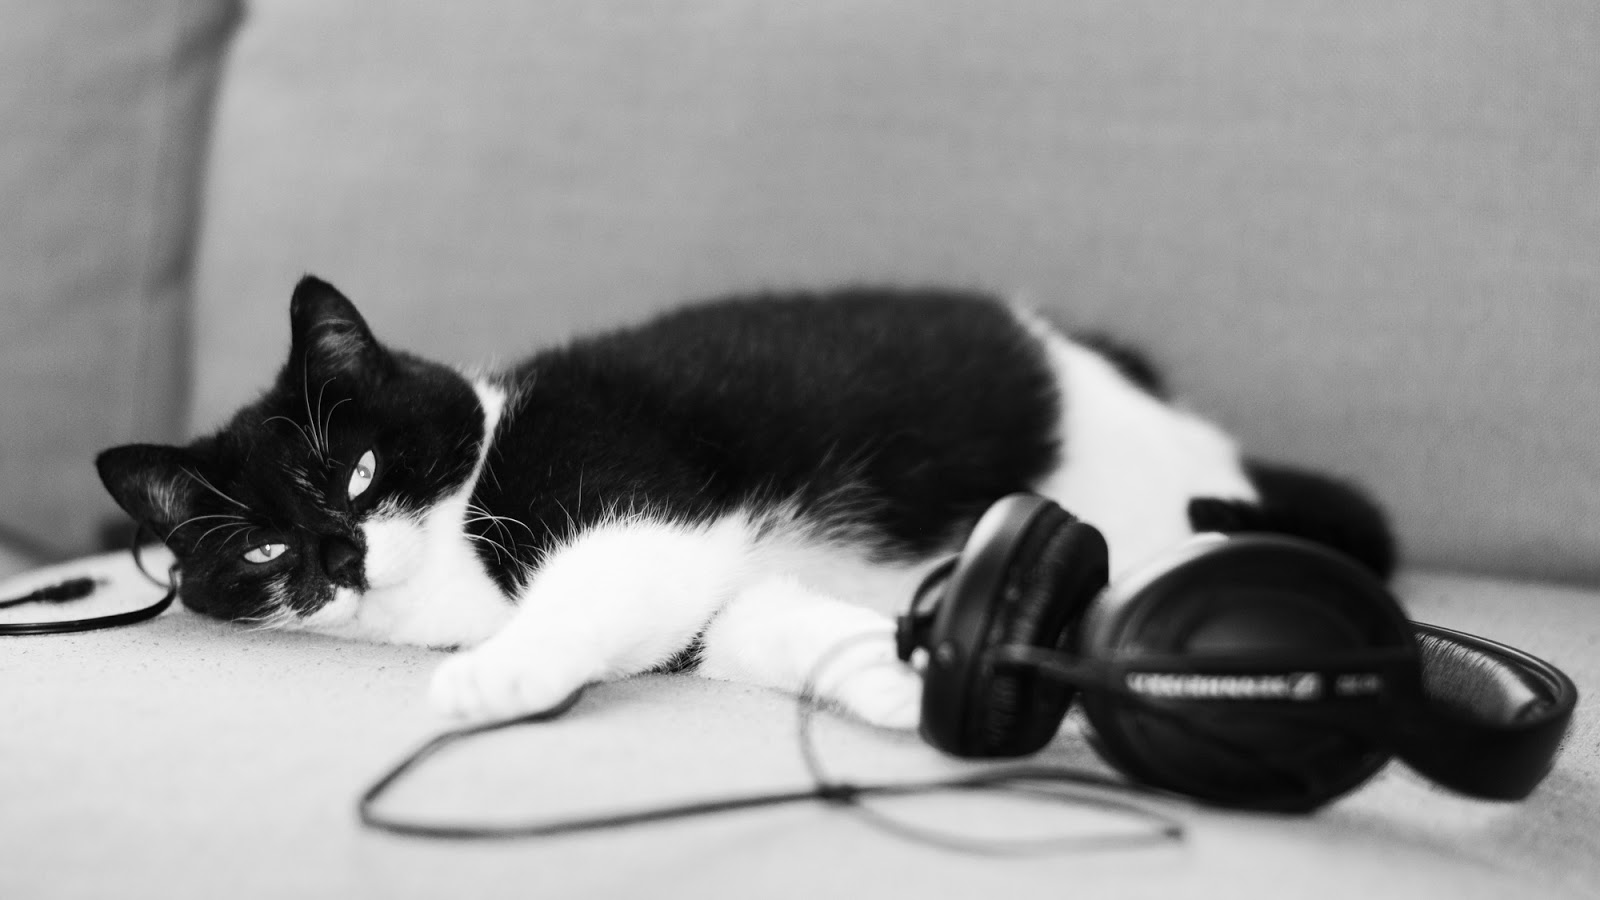 headphone_kitty_by_super_formosa_from_flickr_cc-sa.jpg